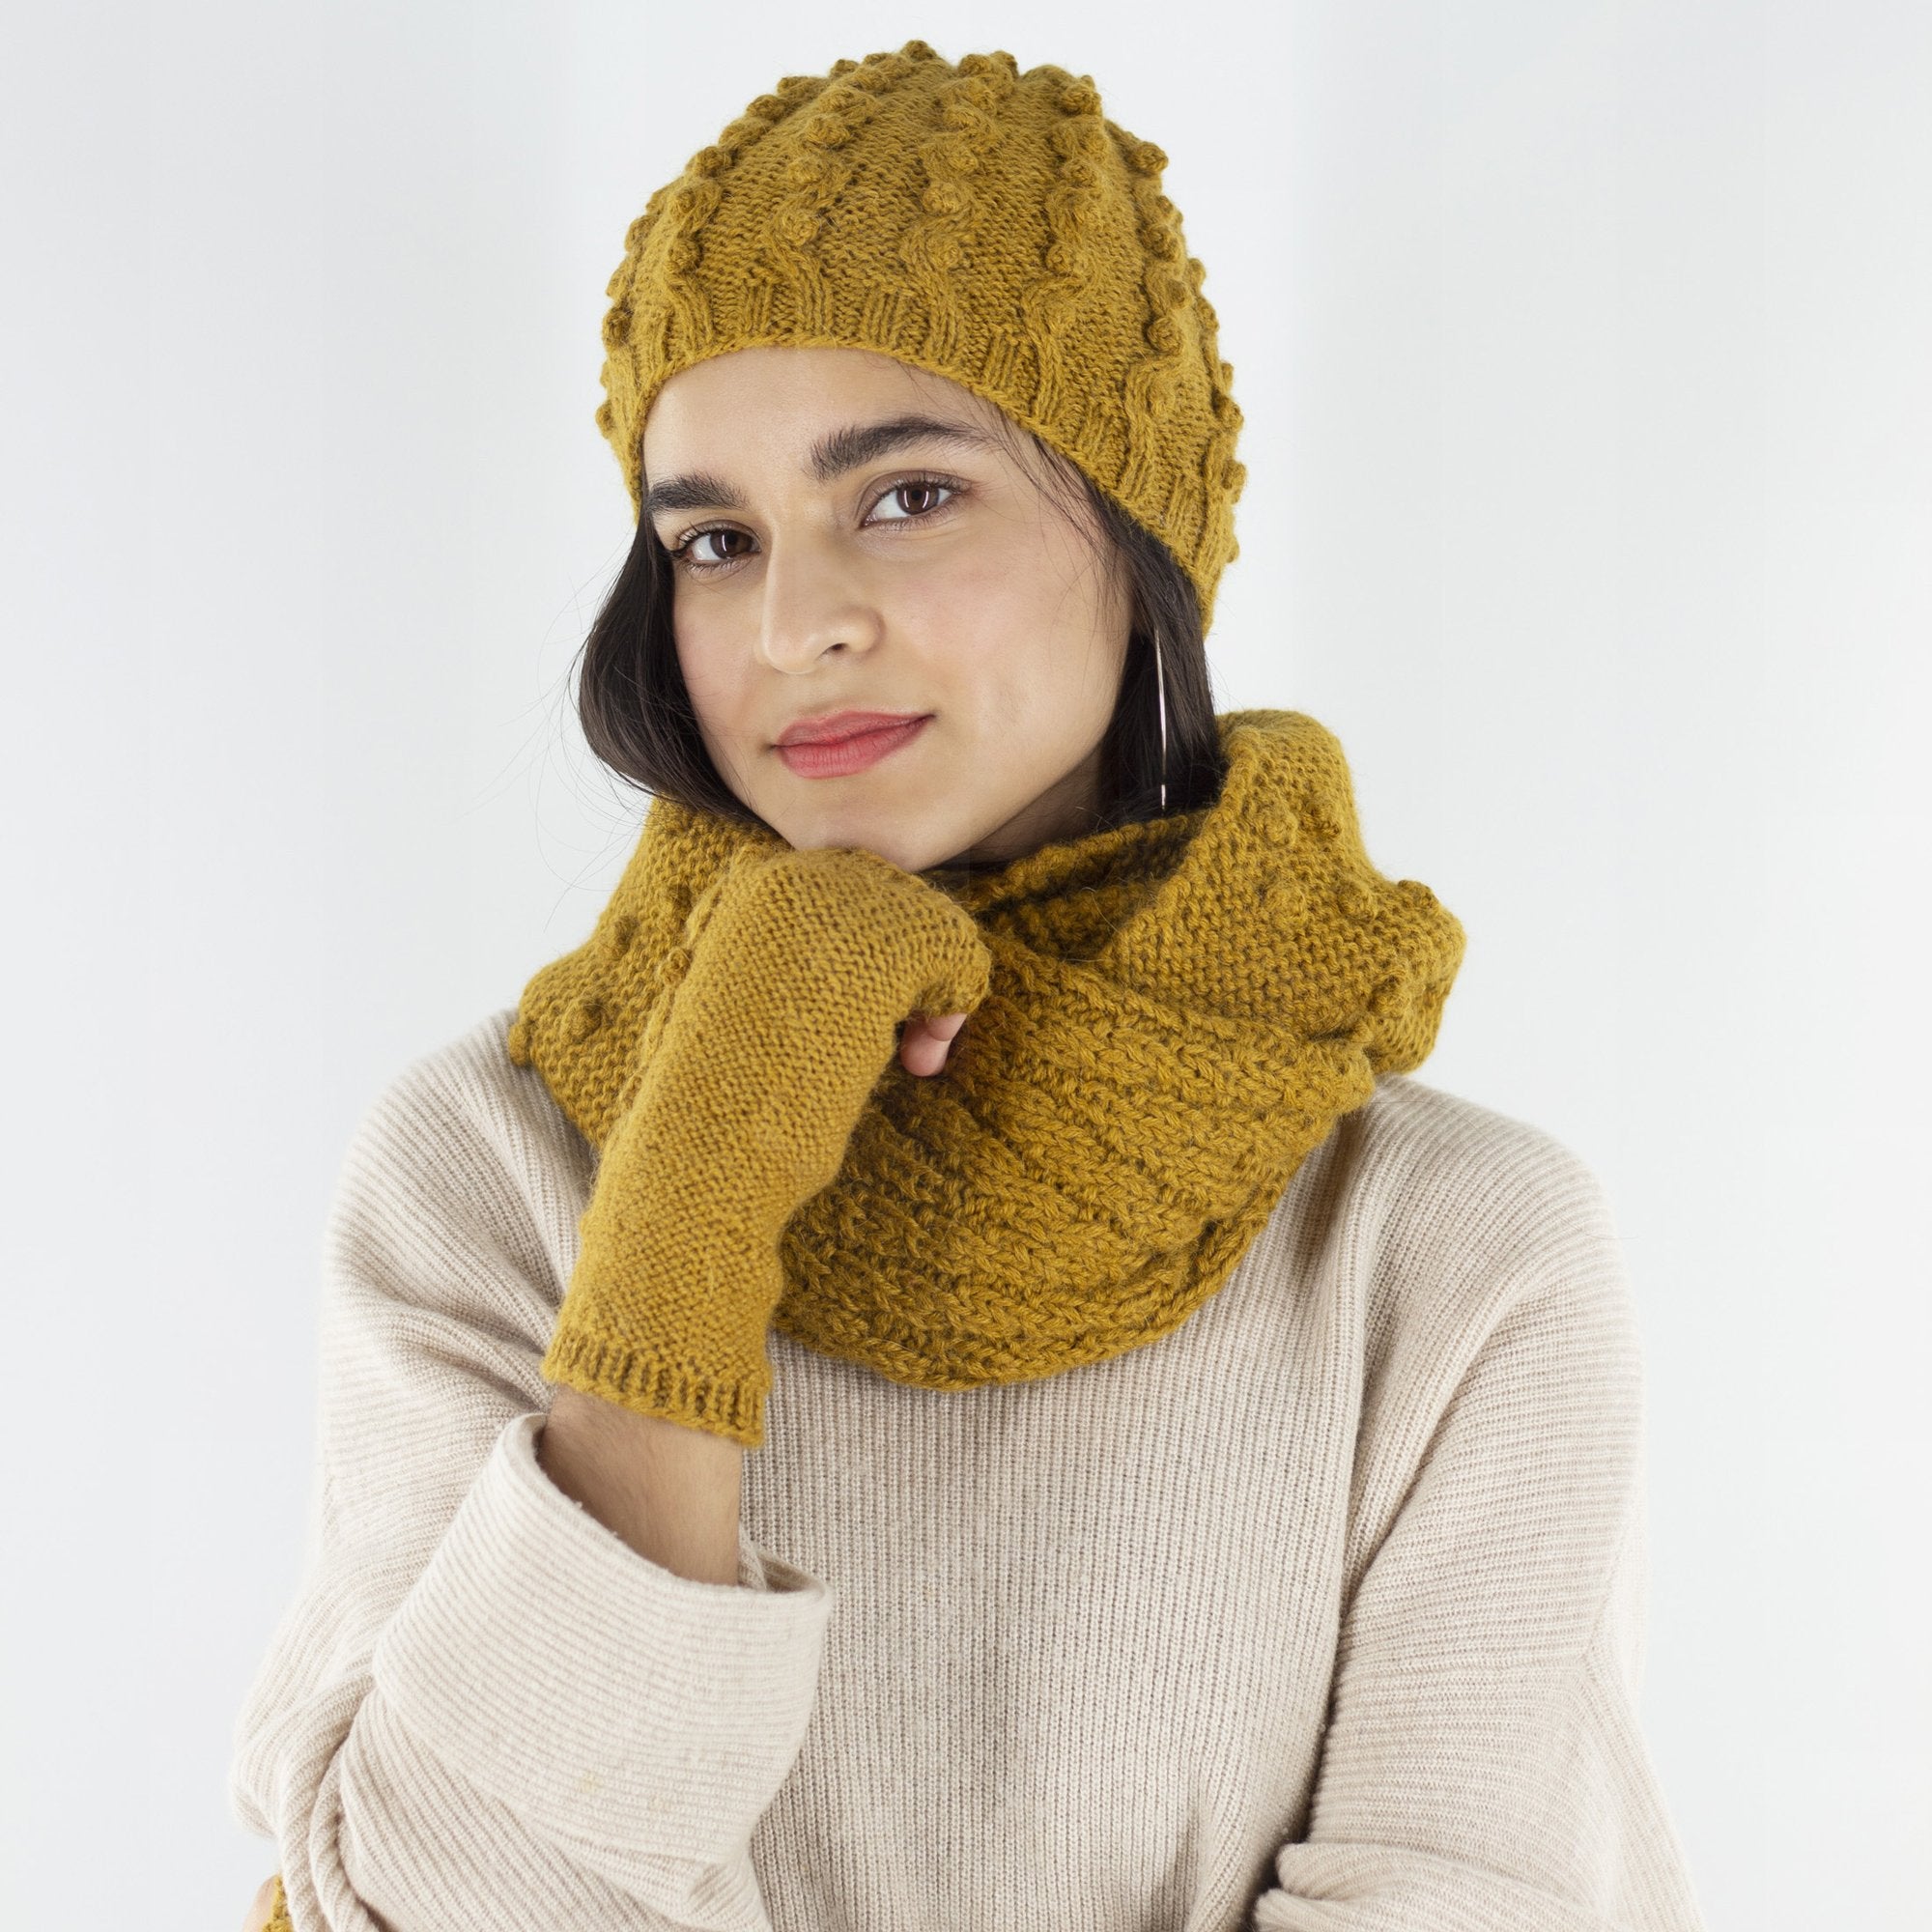 Image of model wearing mustard colored infinity scarf around neck and matching fingerless gloves made from 100% alpaca